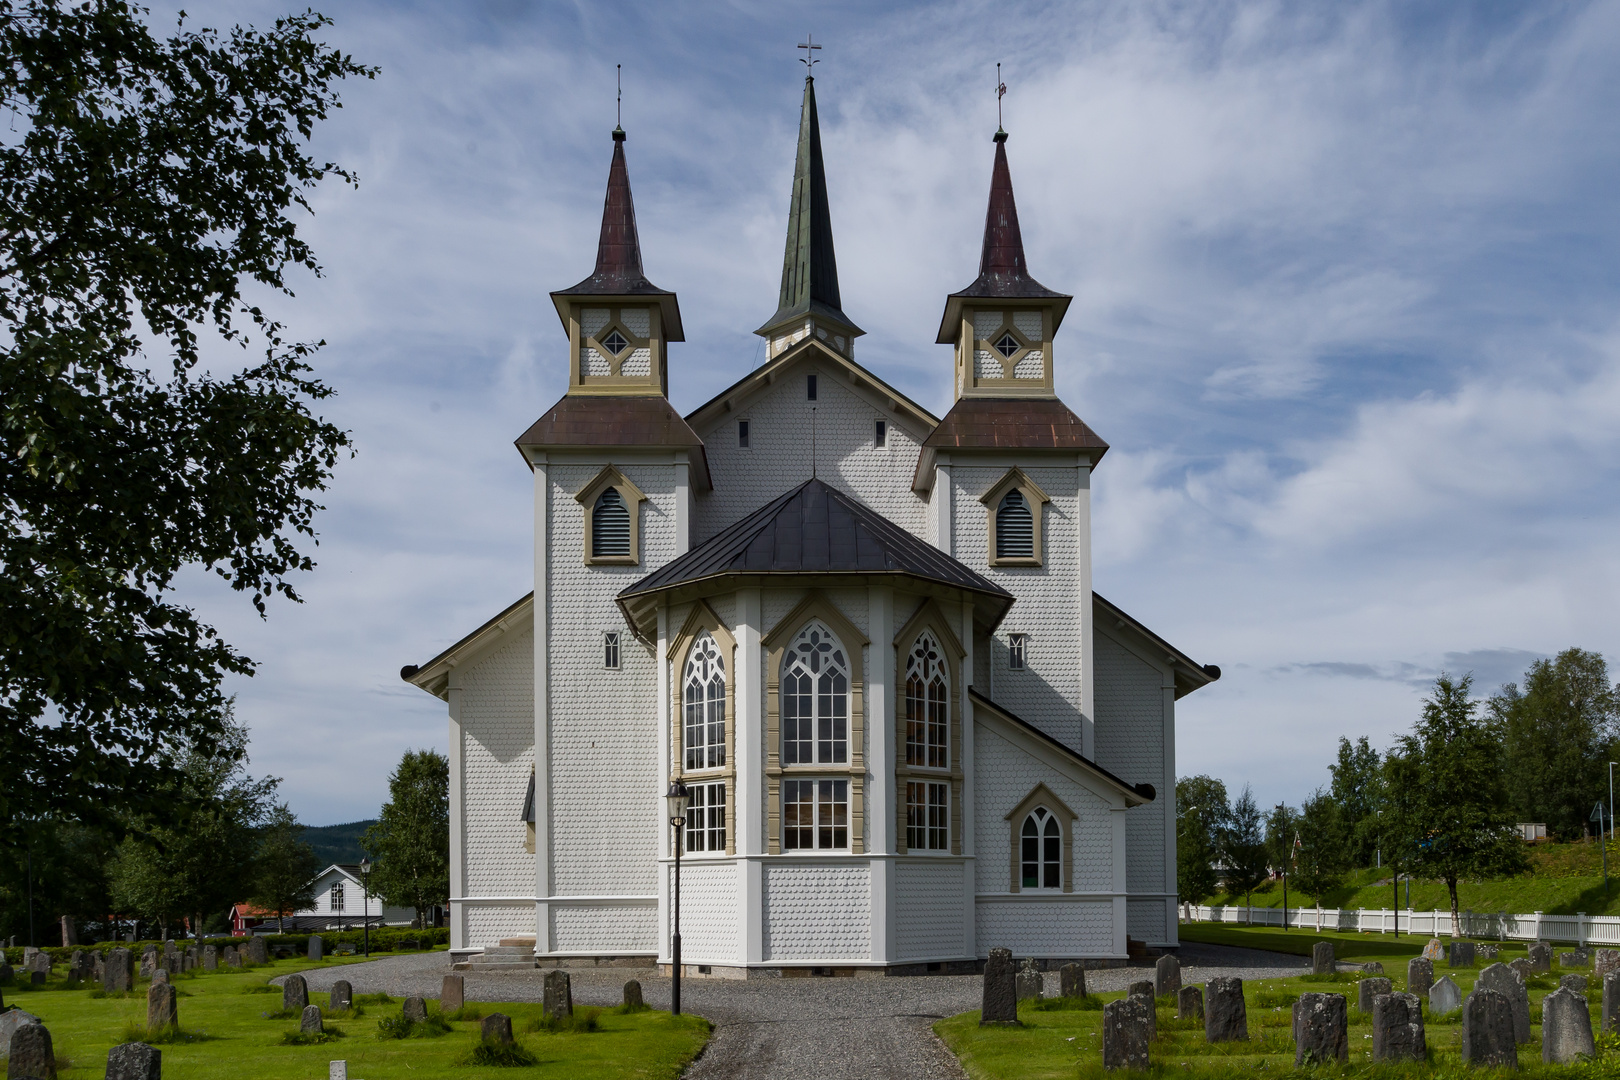 1 Holzkirche in Duved